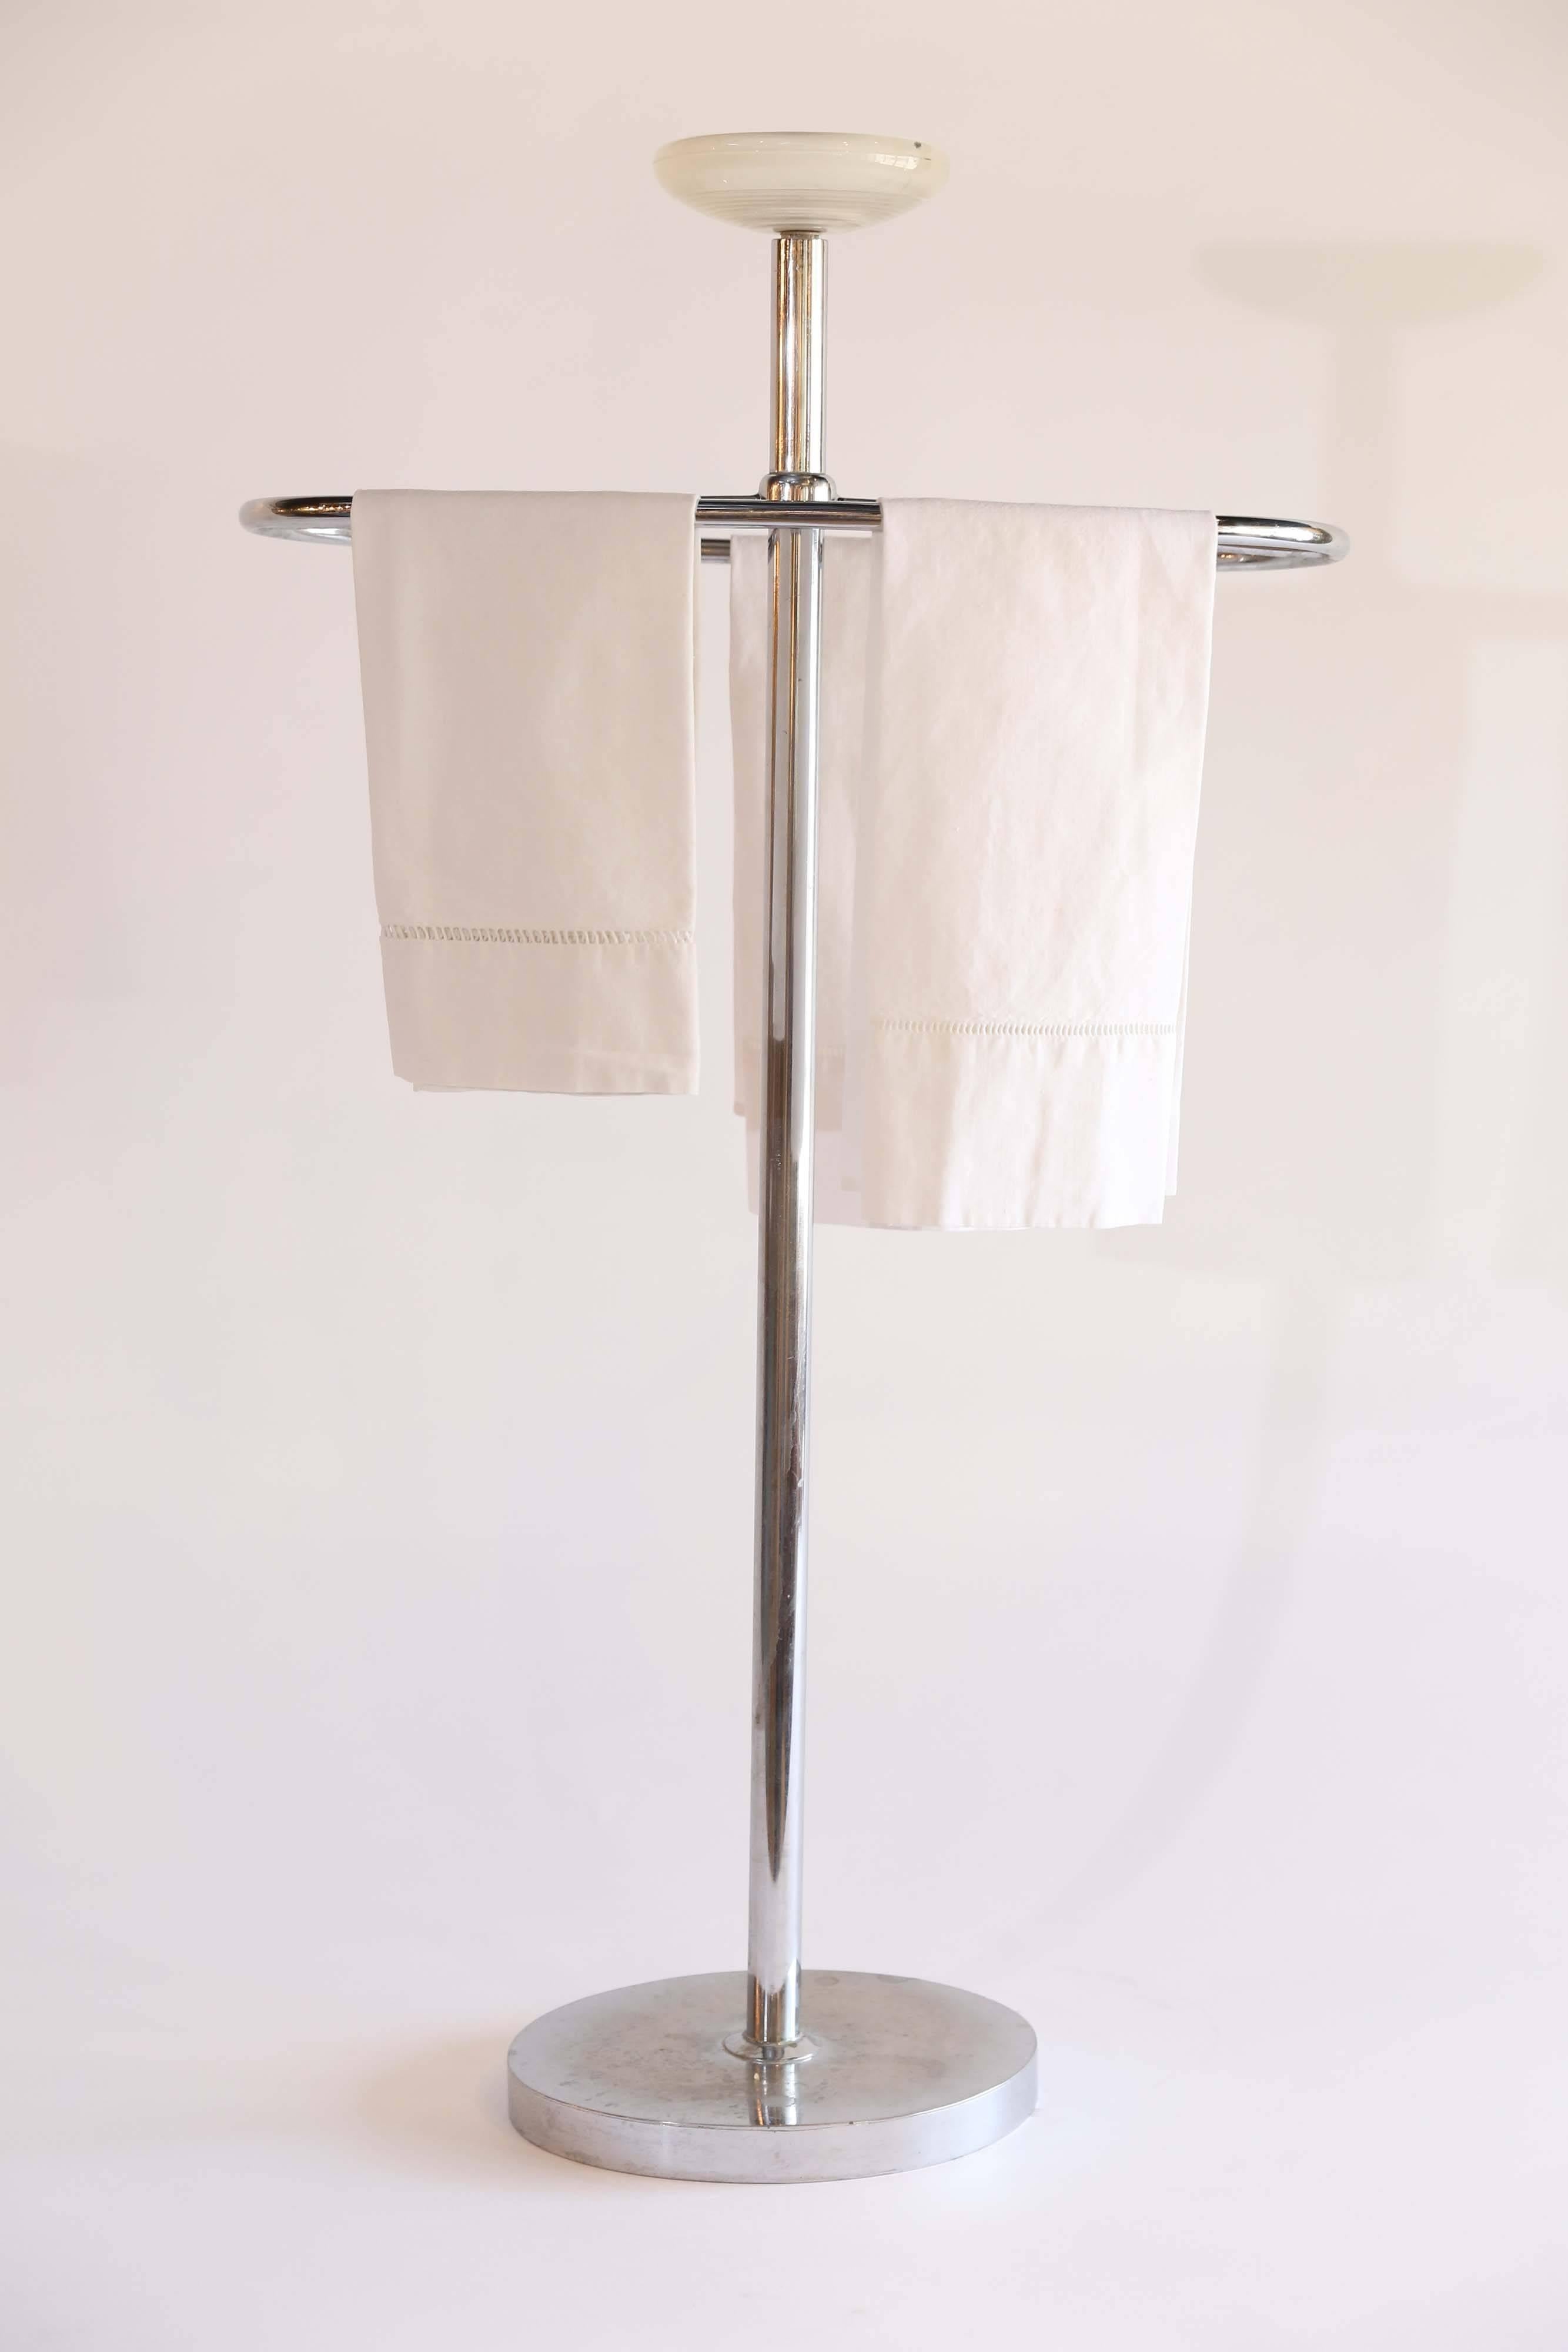 A chrome midcentury towel stand from France with a shaped receptacle of frosted glass on top to hold lotion or other sundries. The base of the stand has dulled with time but the styling of the piece is what truly shines. Smart and sophisticated.